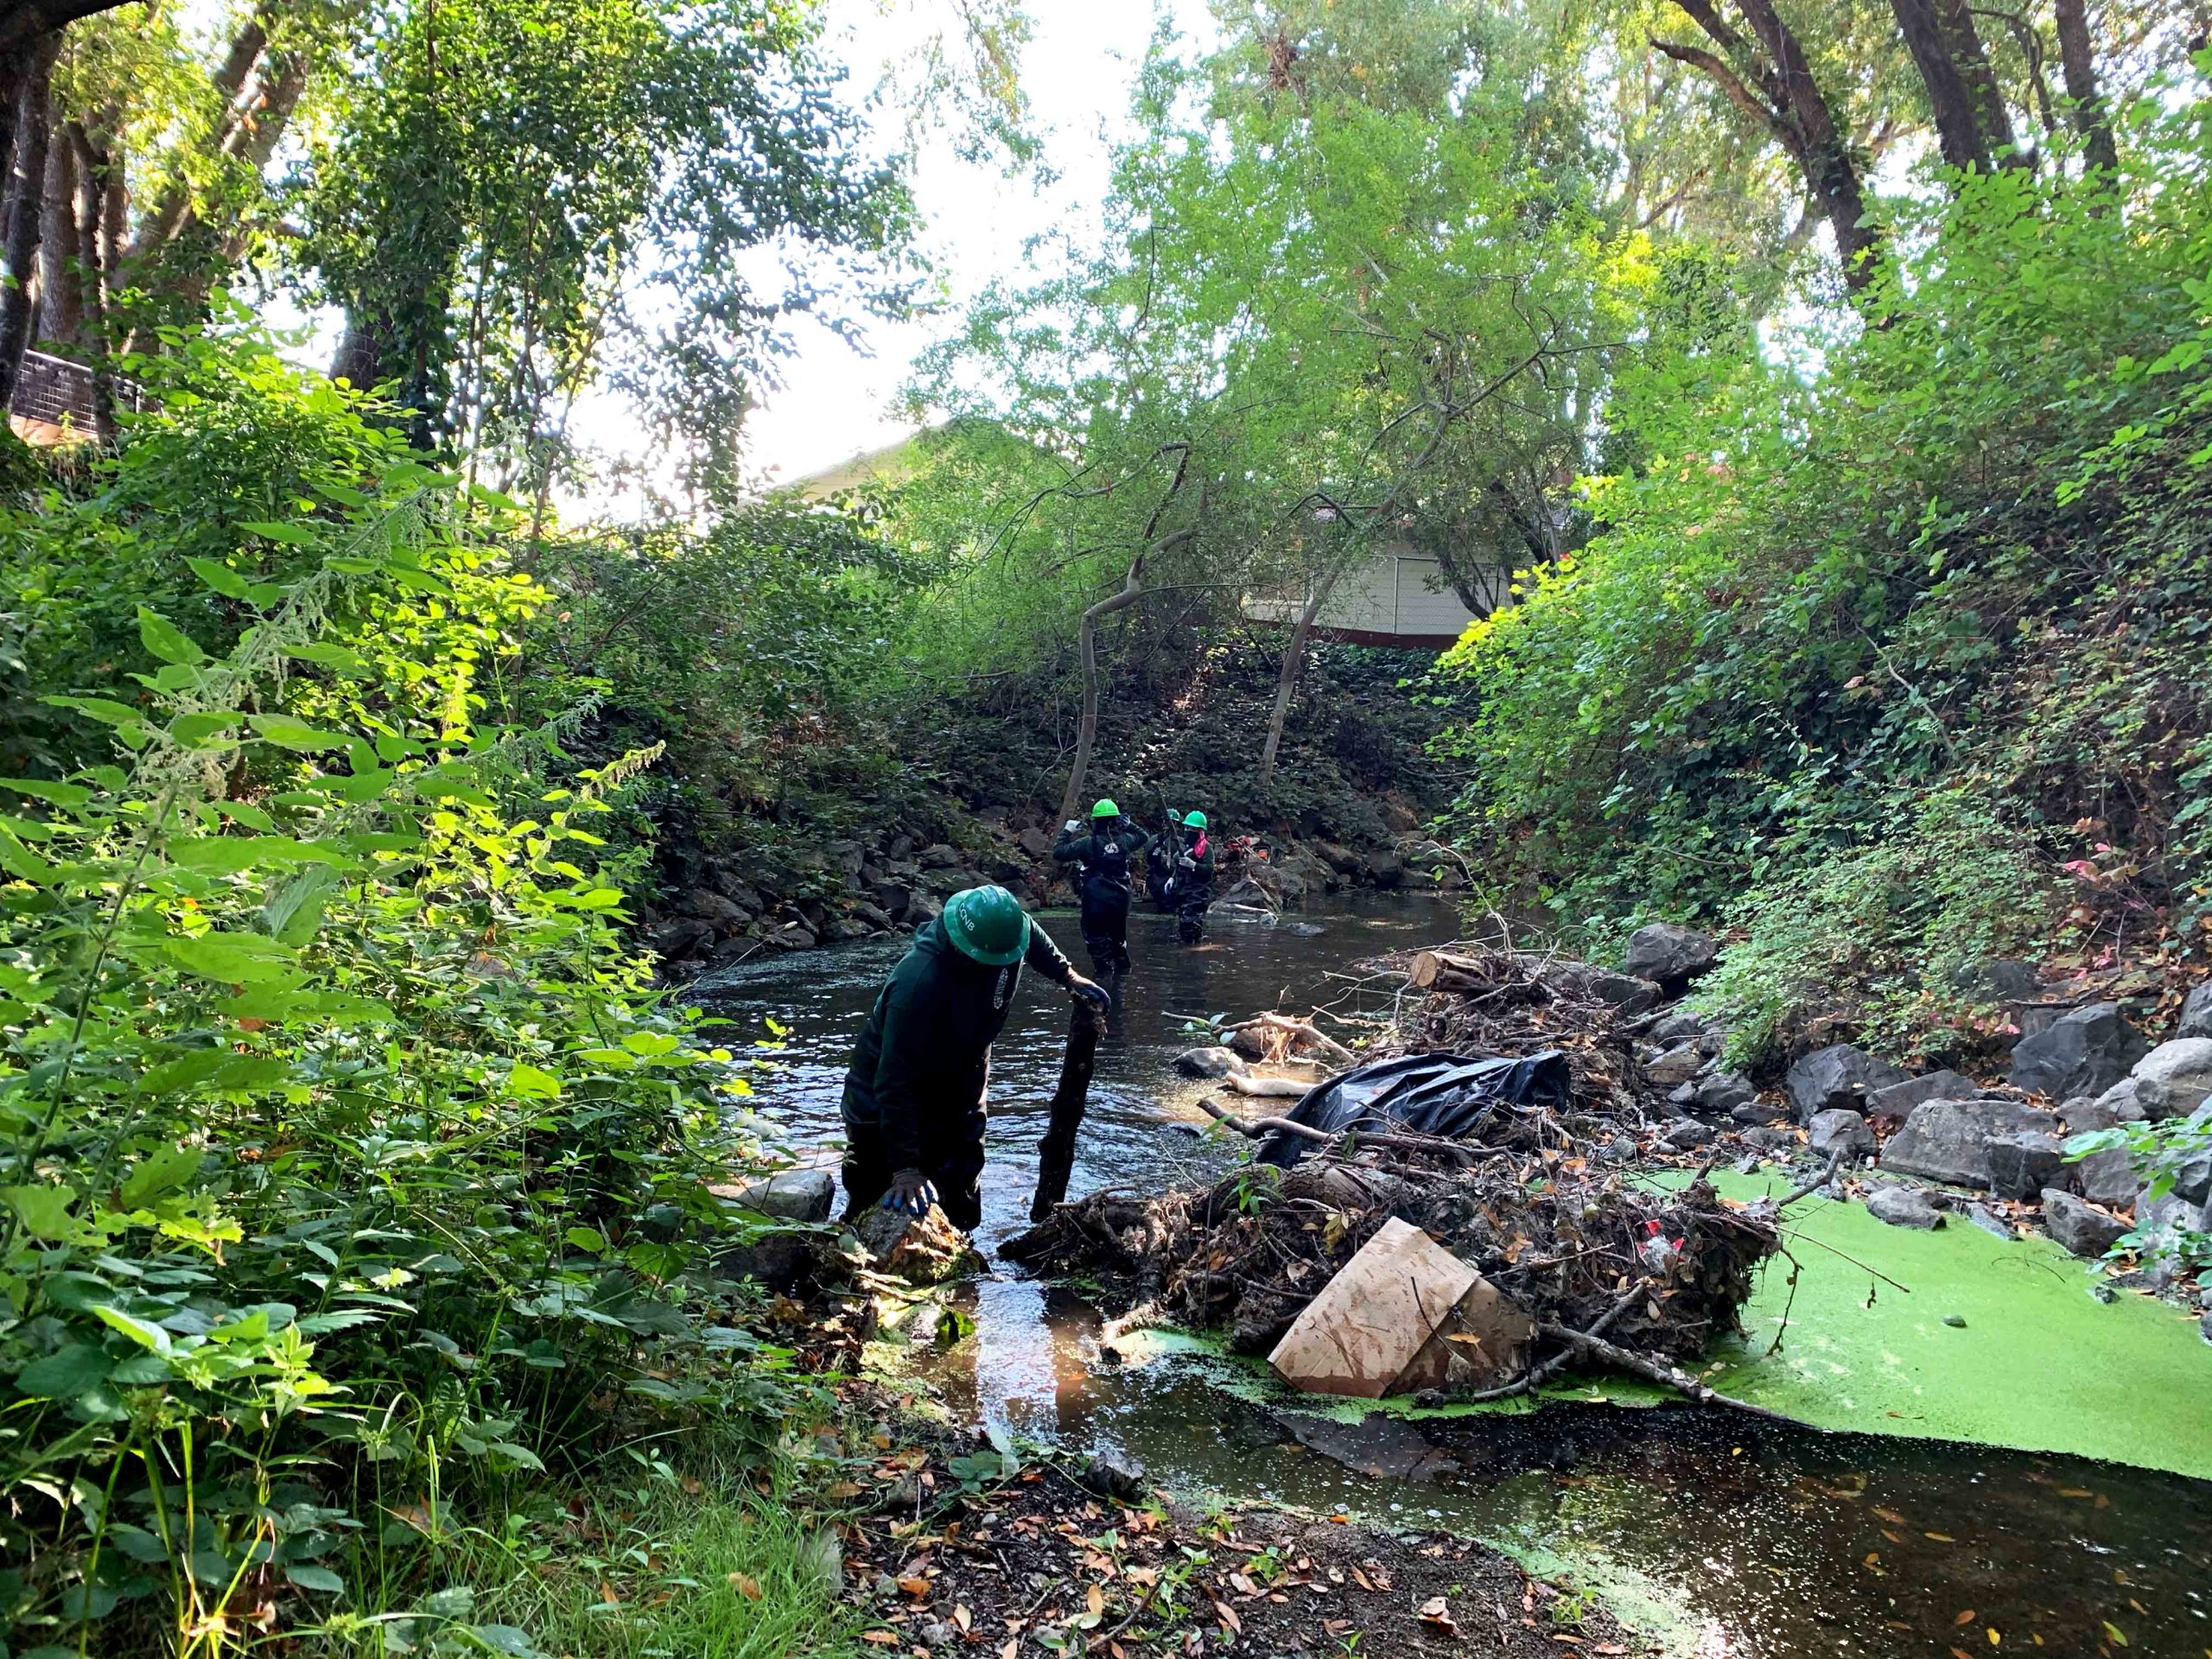 North Bay Conservation Corps crew assisting DPW staff with debris clearing in Novato Creek.